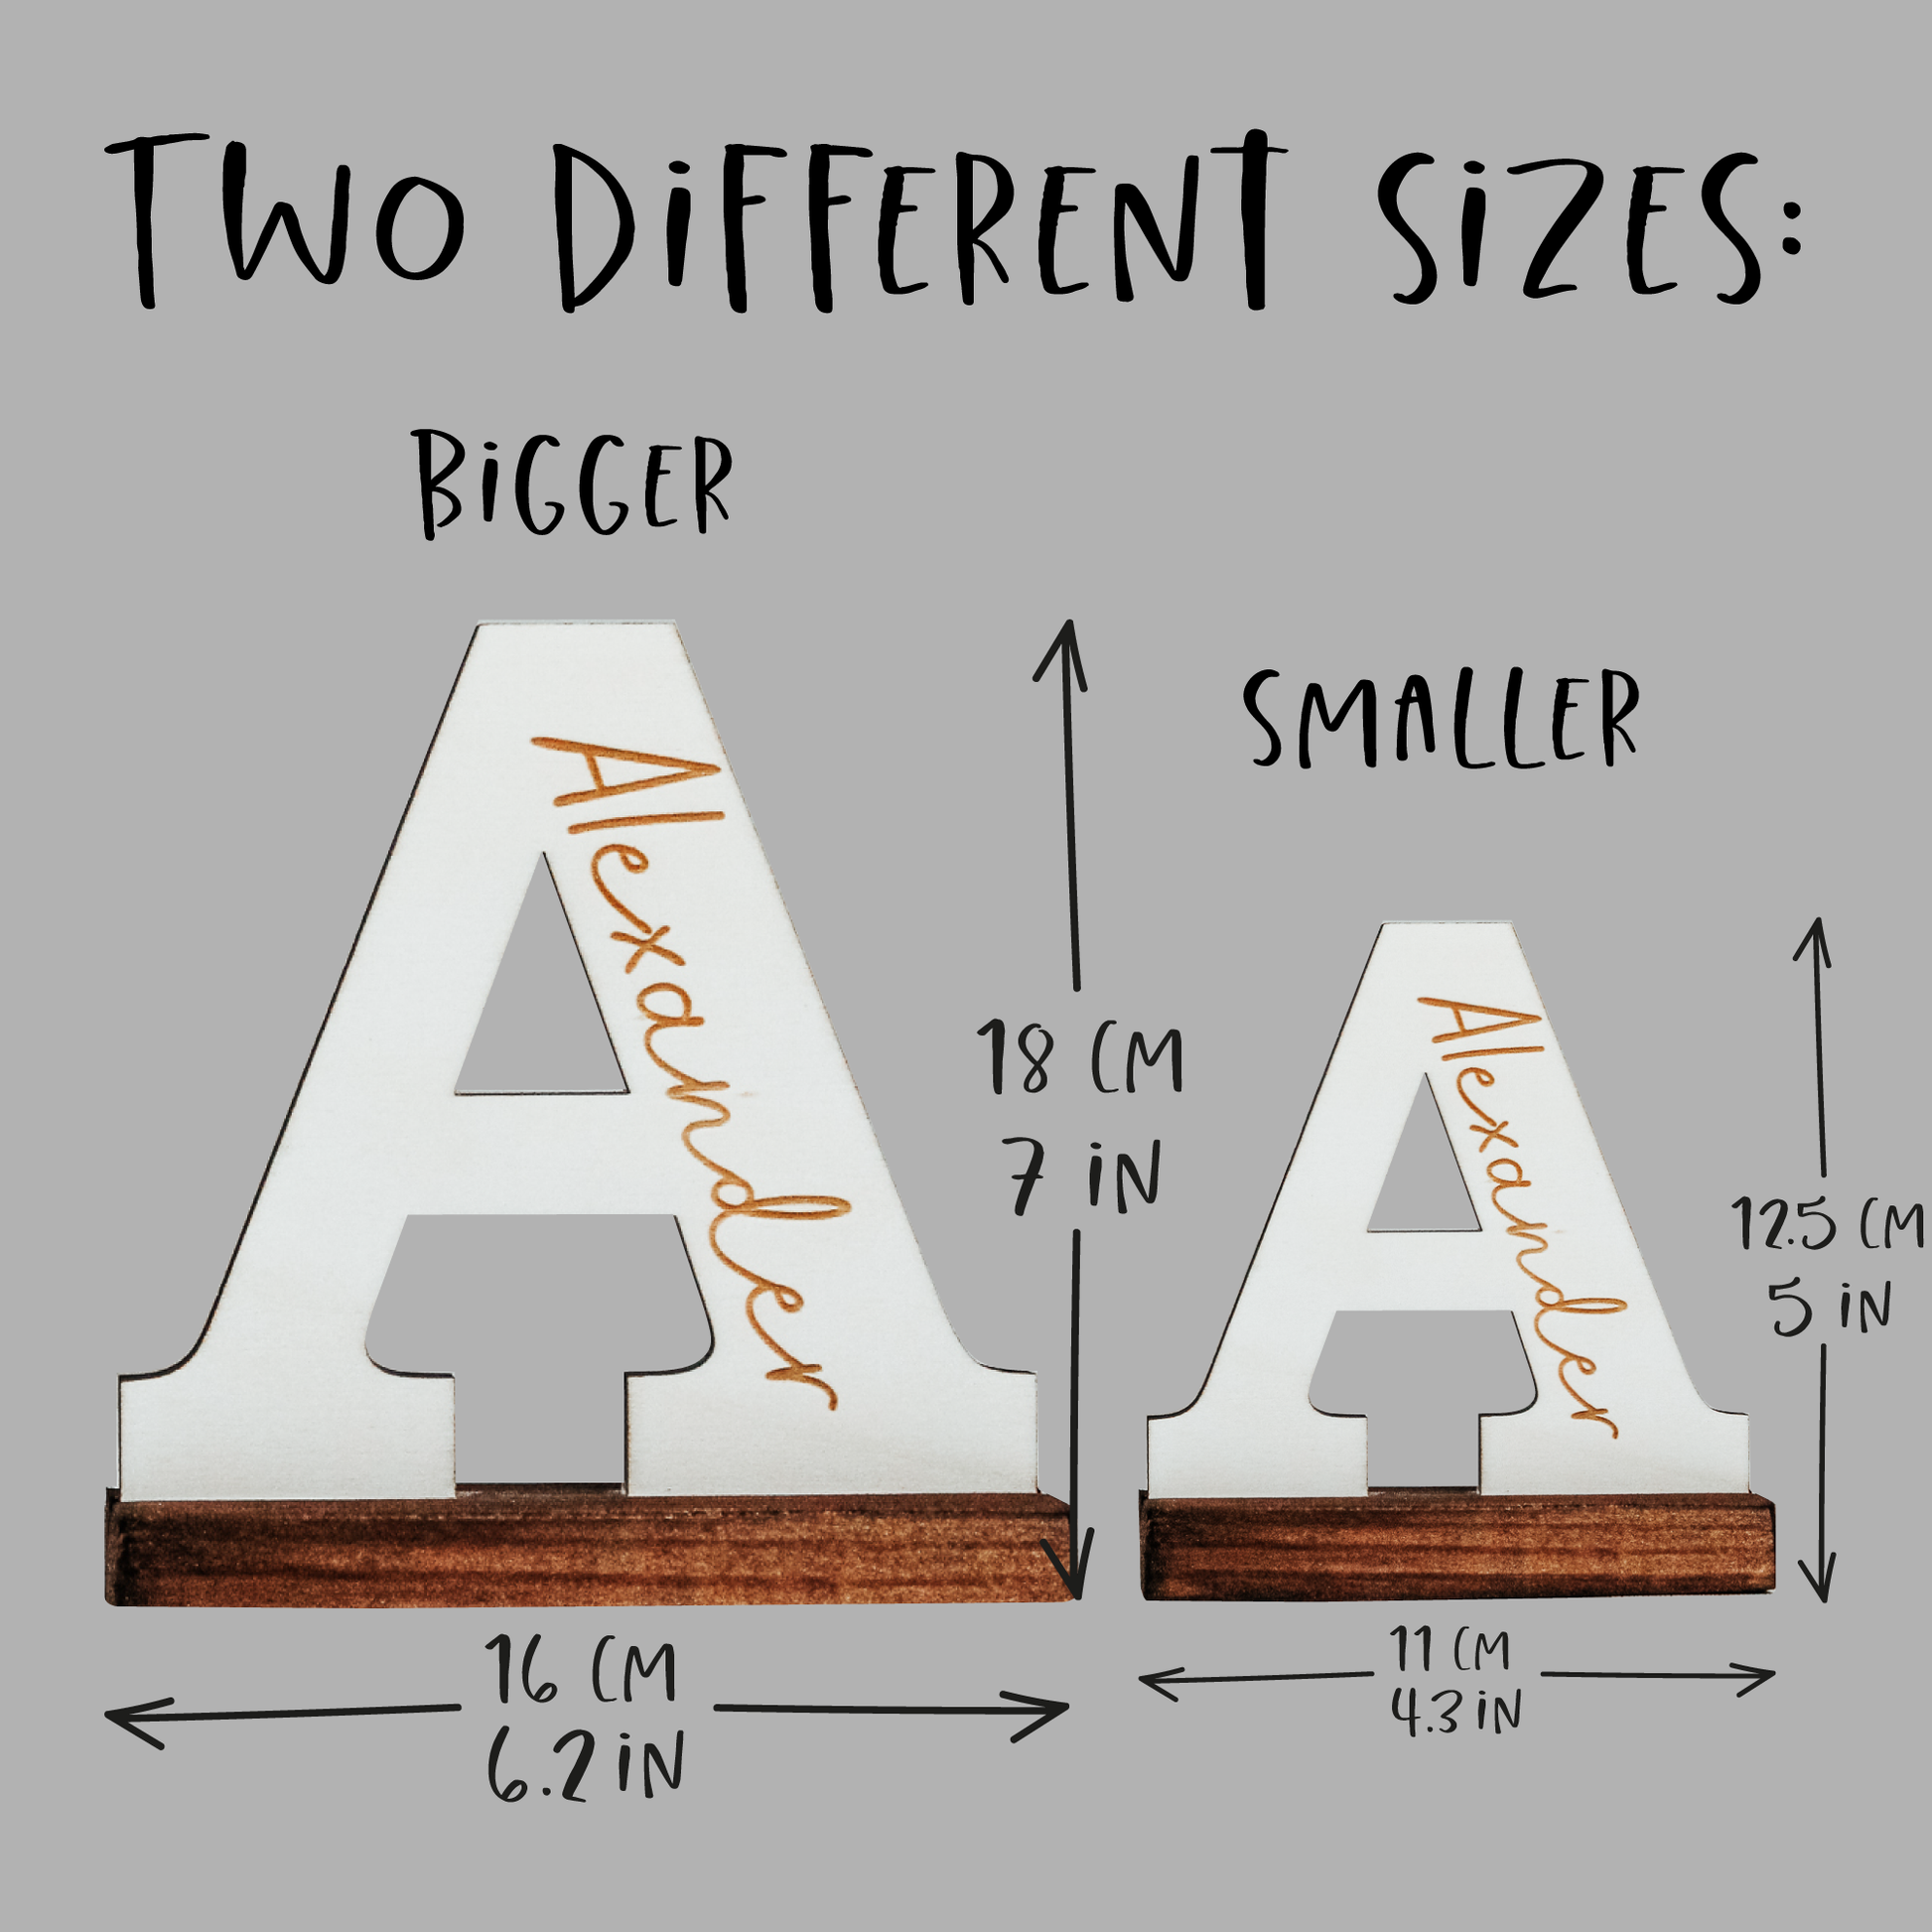 two size options for the letters a bigger size of 16 cm by 18 cm. or the smaller size of 11cm by 12.5 cm